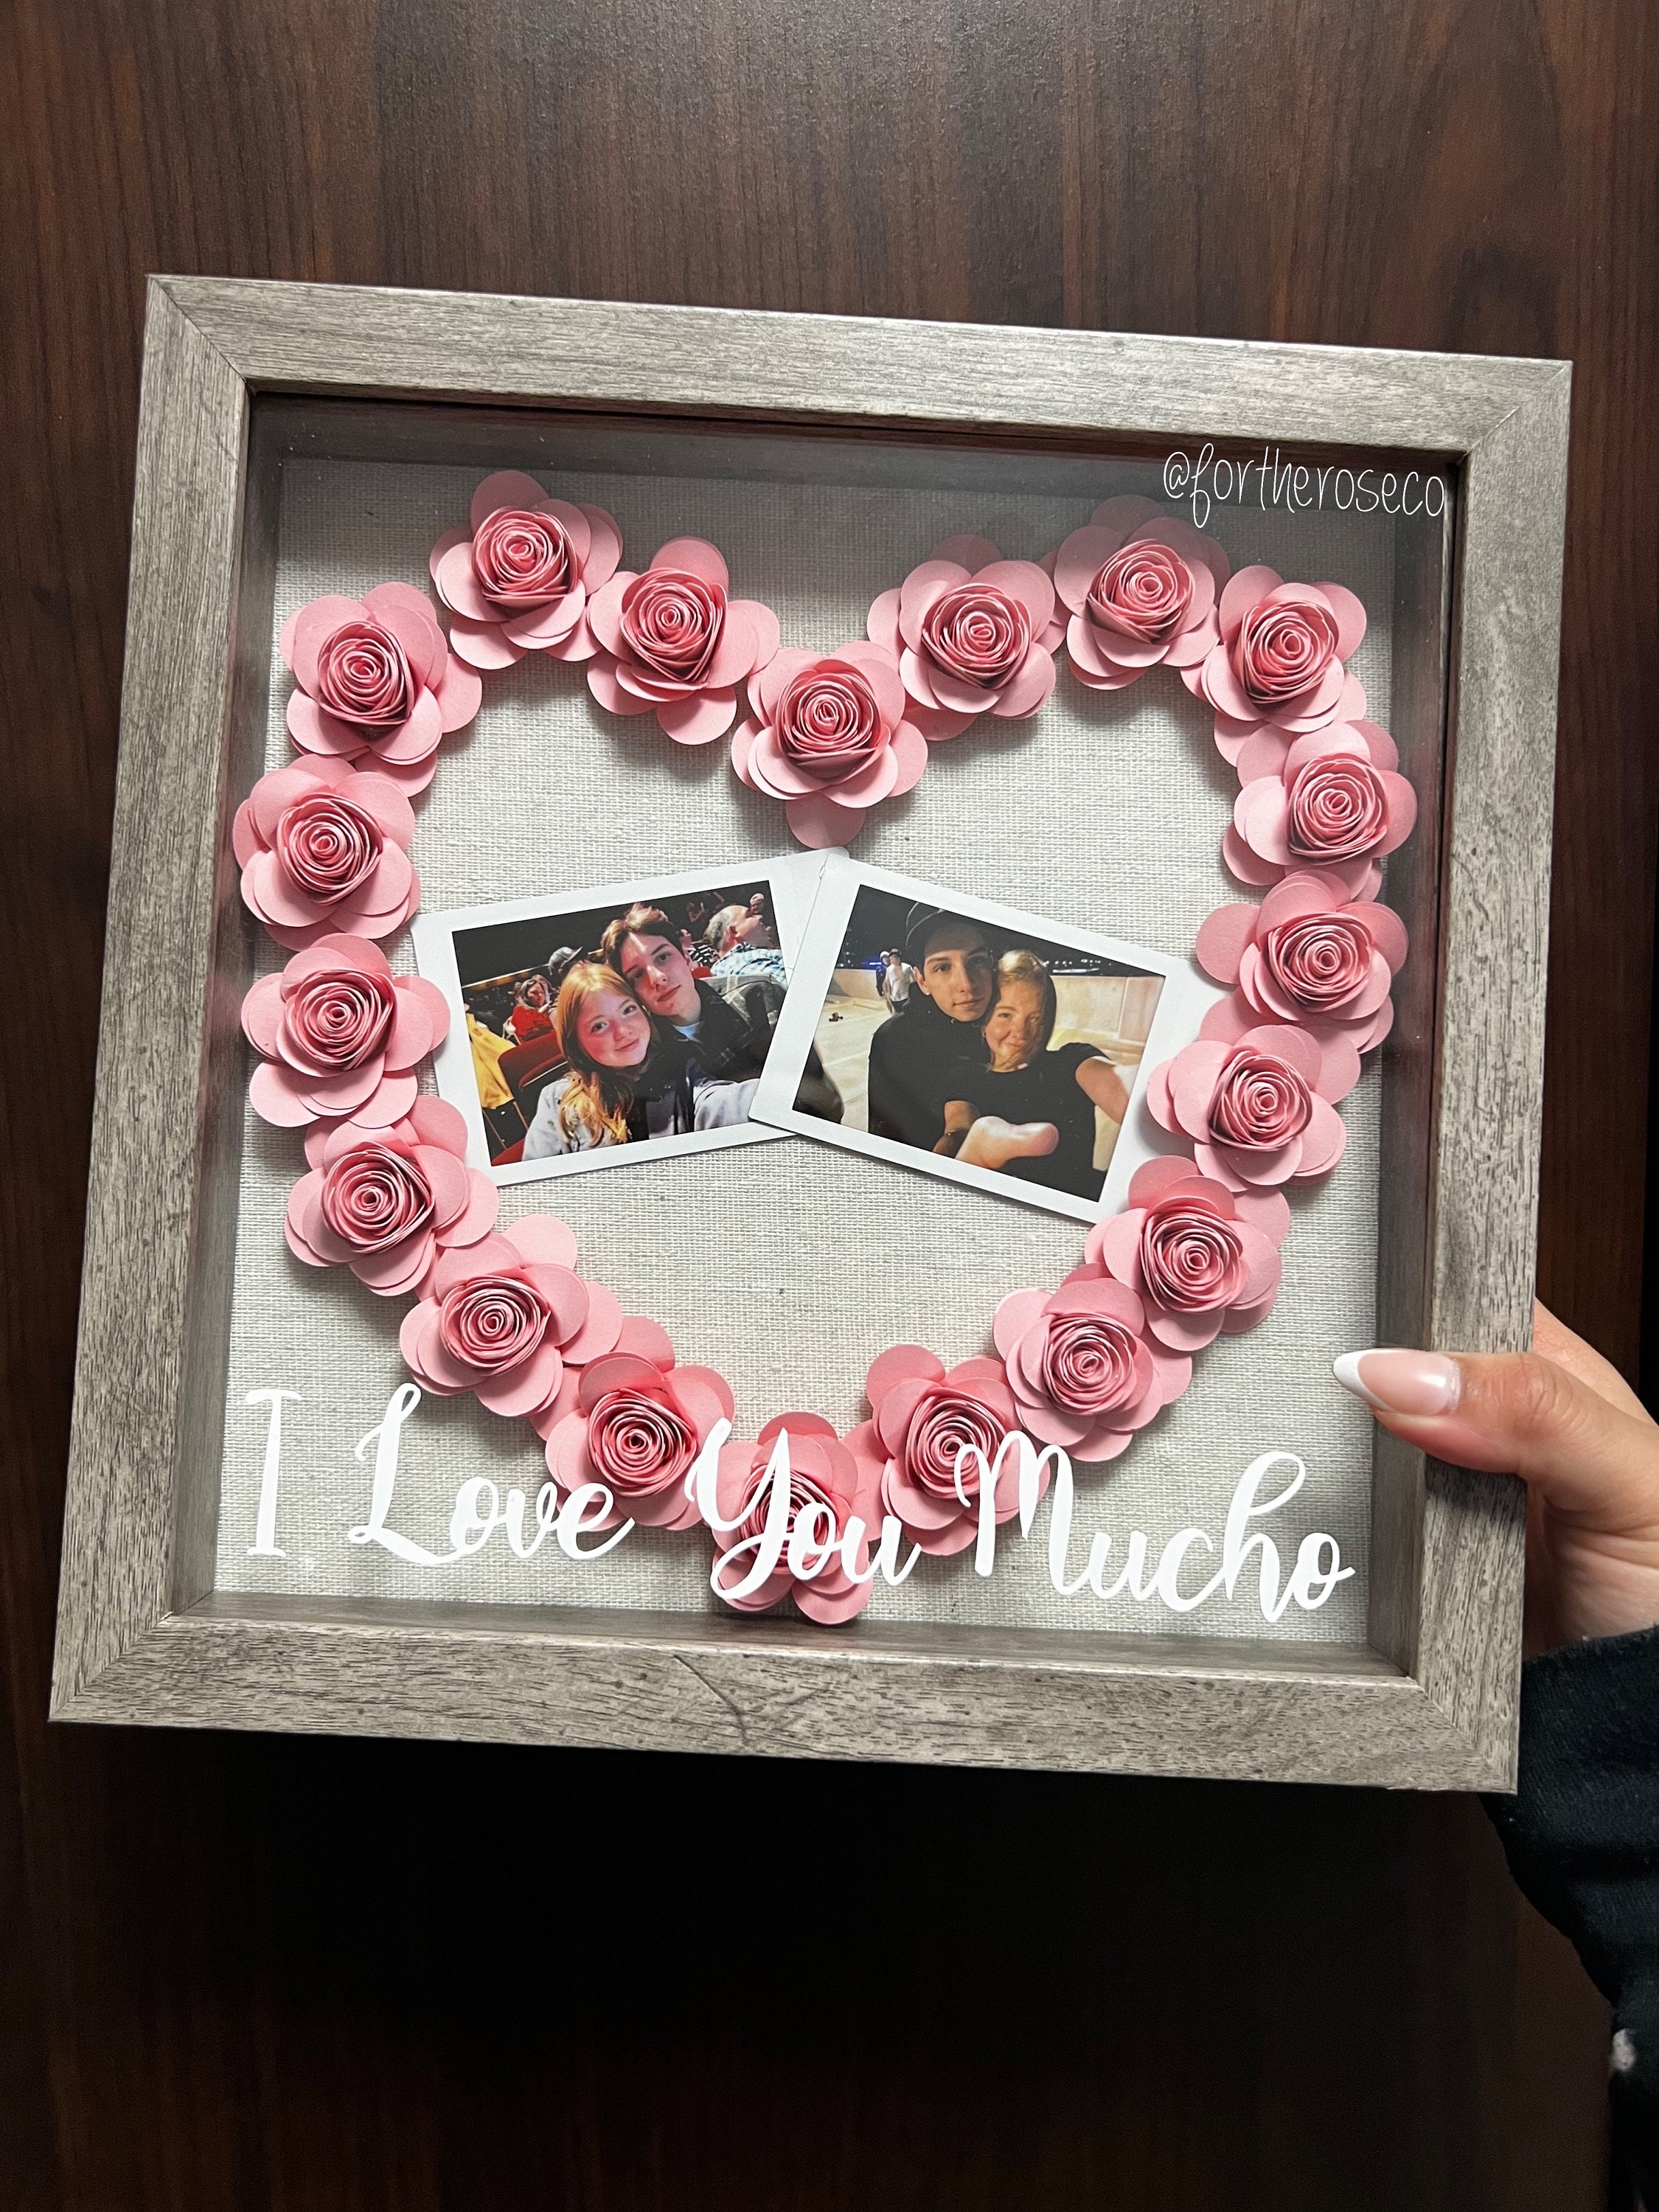 I Love Us Paper Flower Shadow Box.1st Anniversary Gift. -  Canada